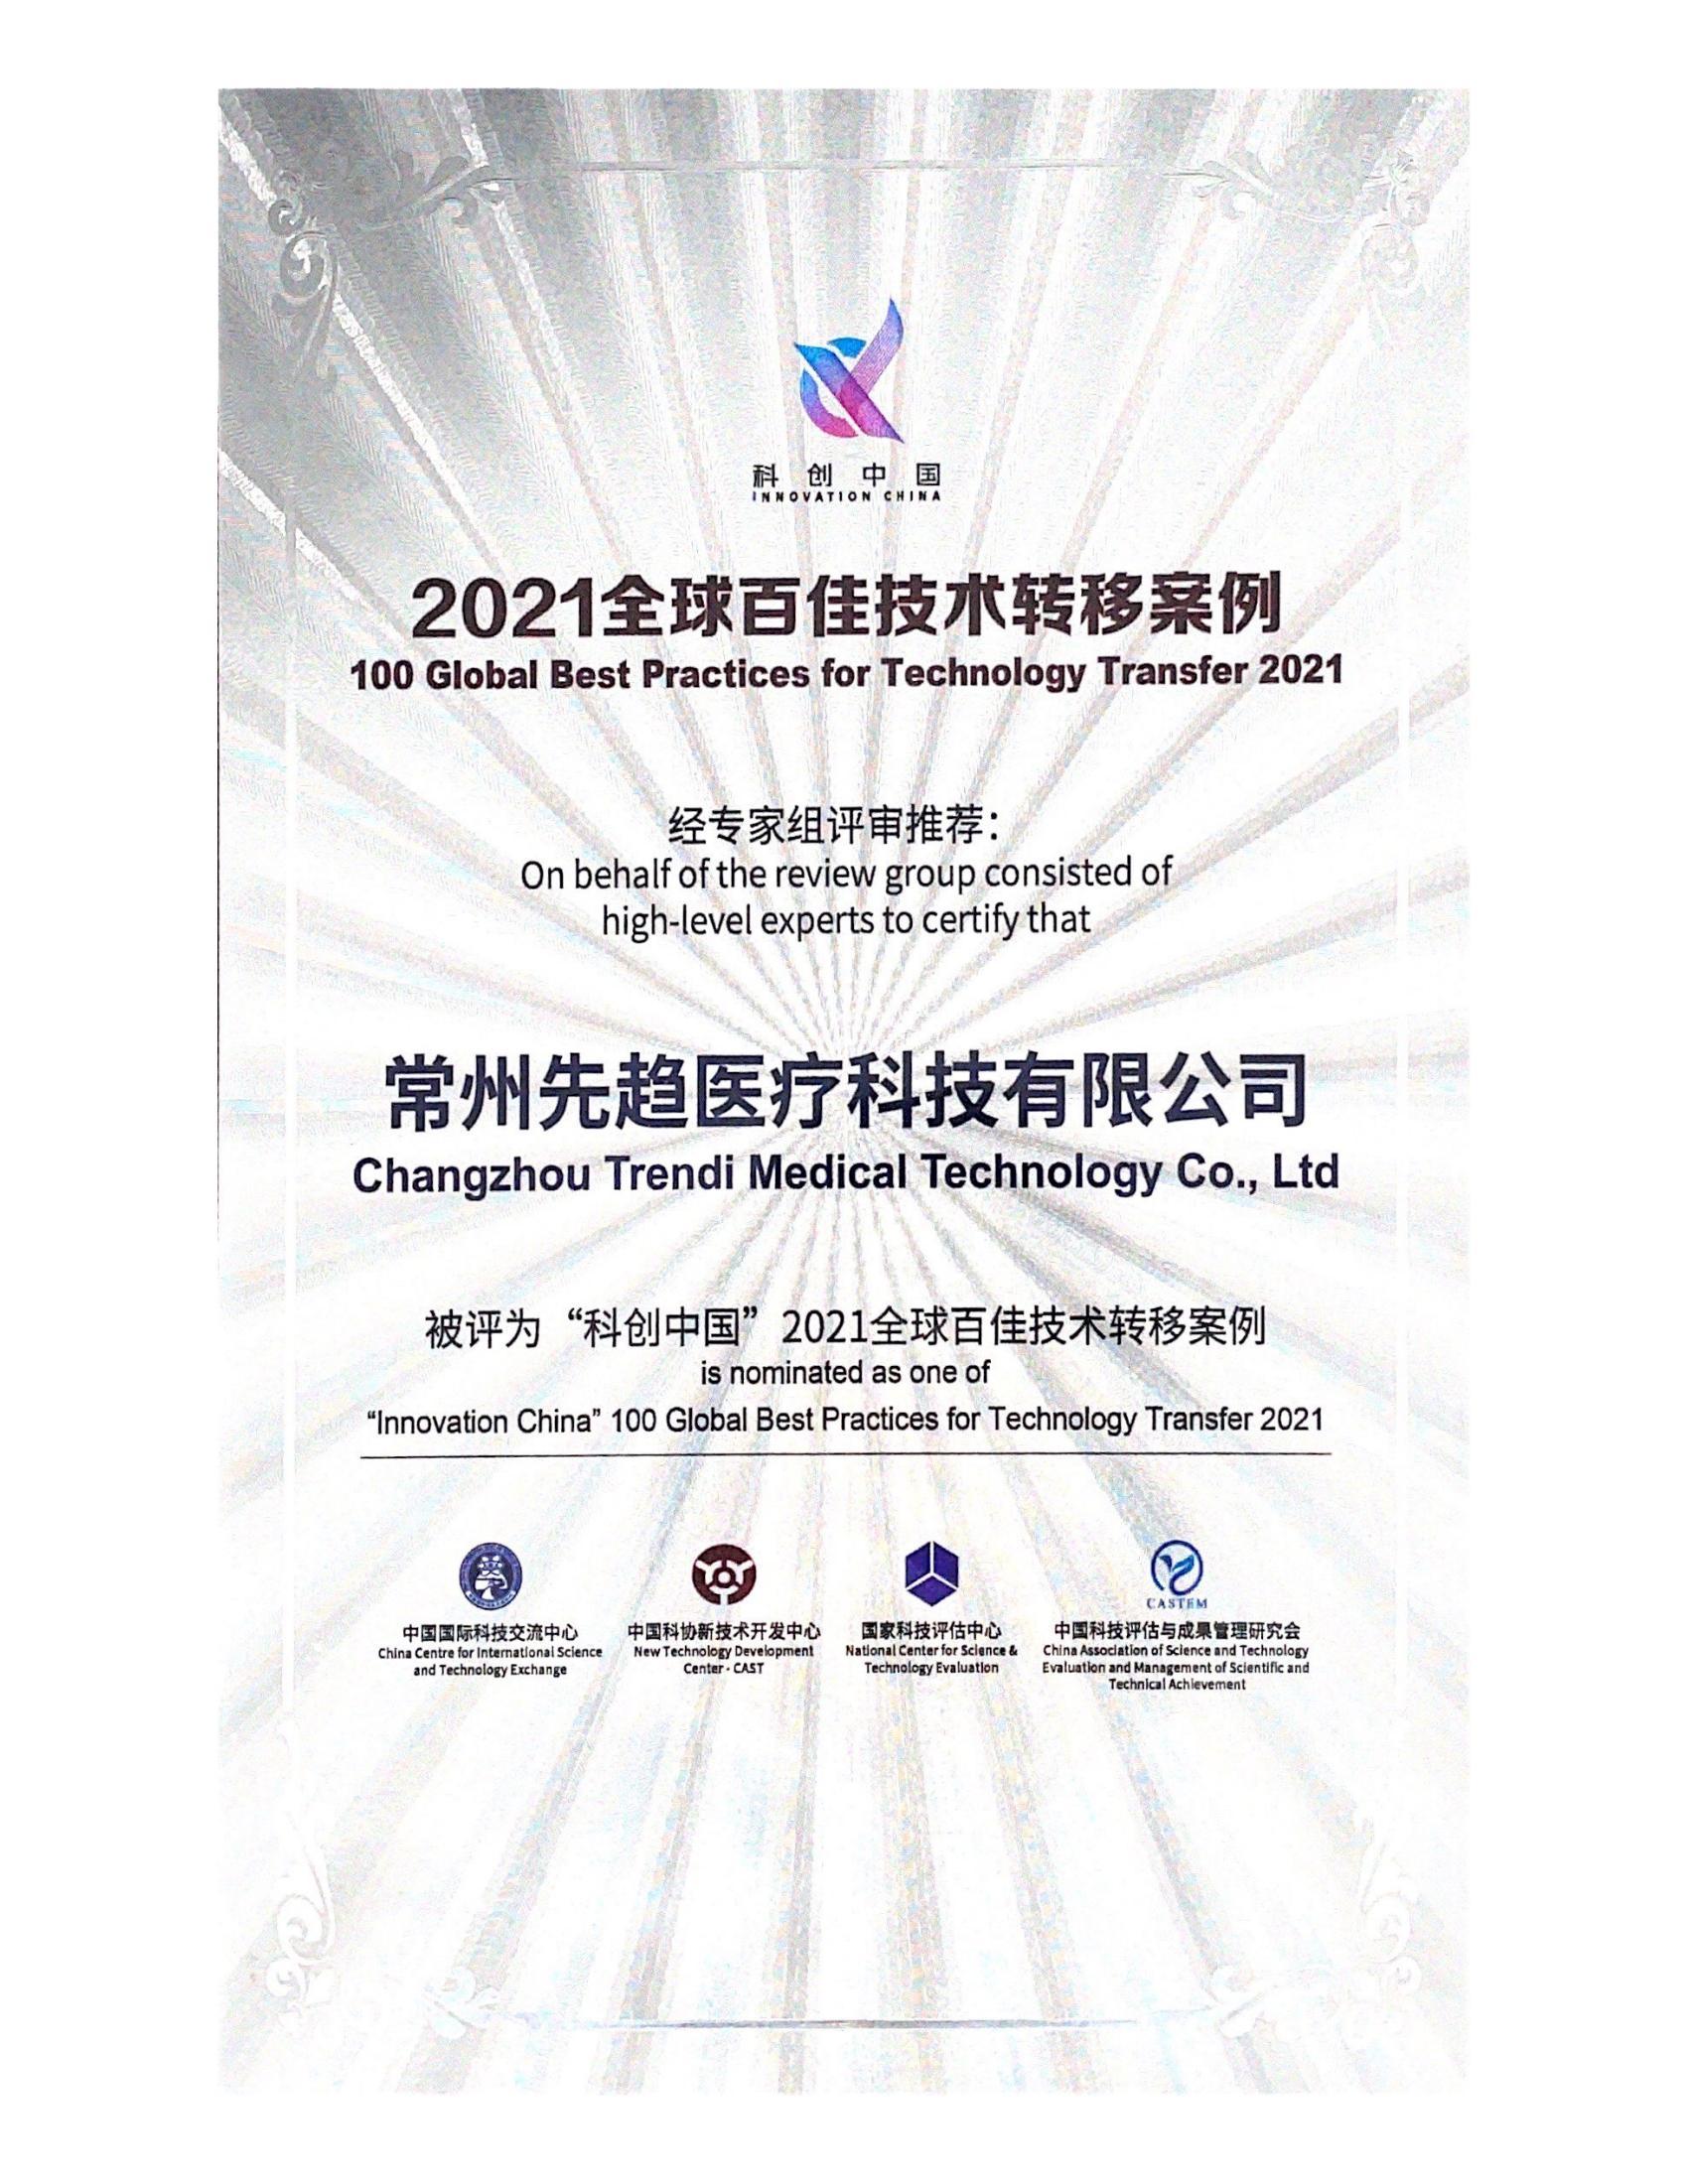 Selected as one of the top 100 global companies in "Science Innovation China" 2021(图1)